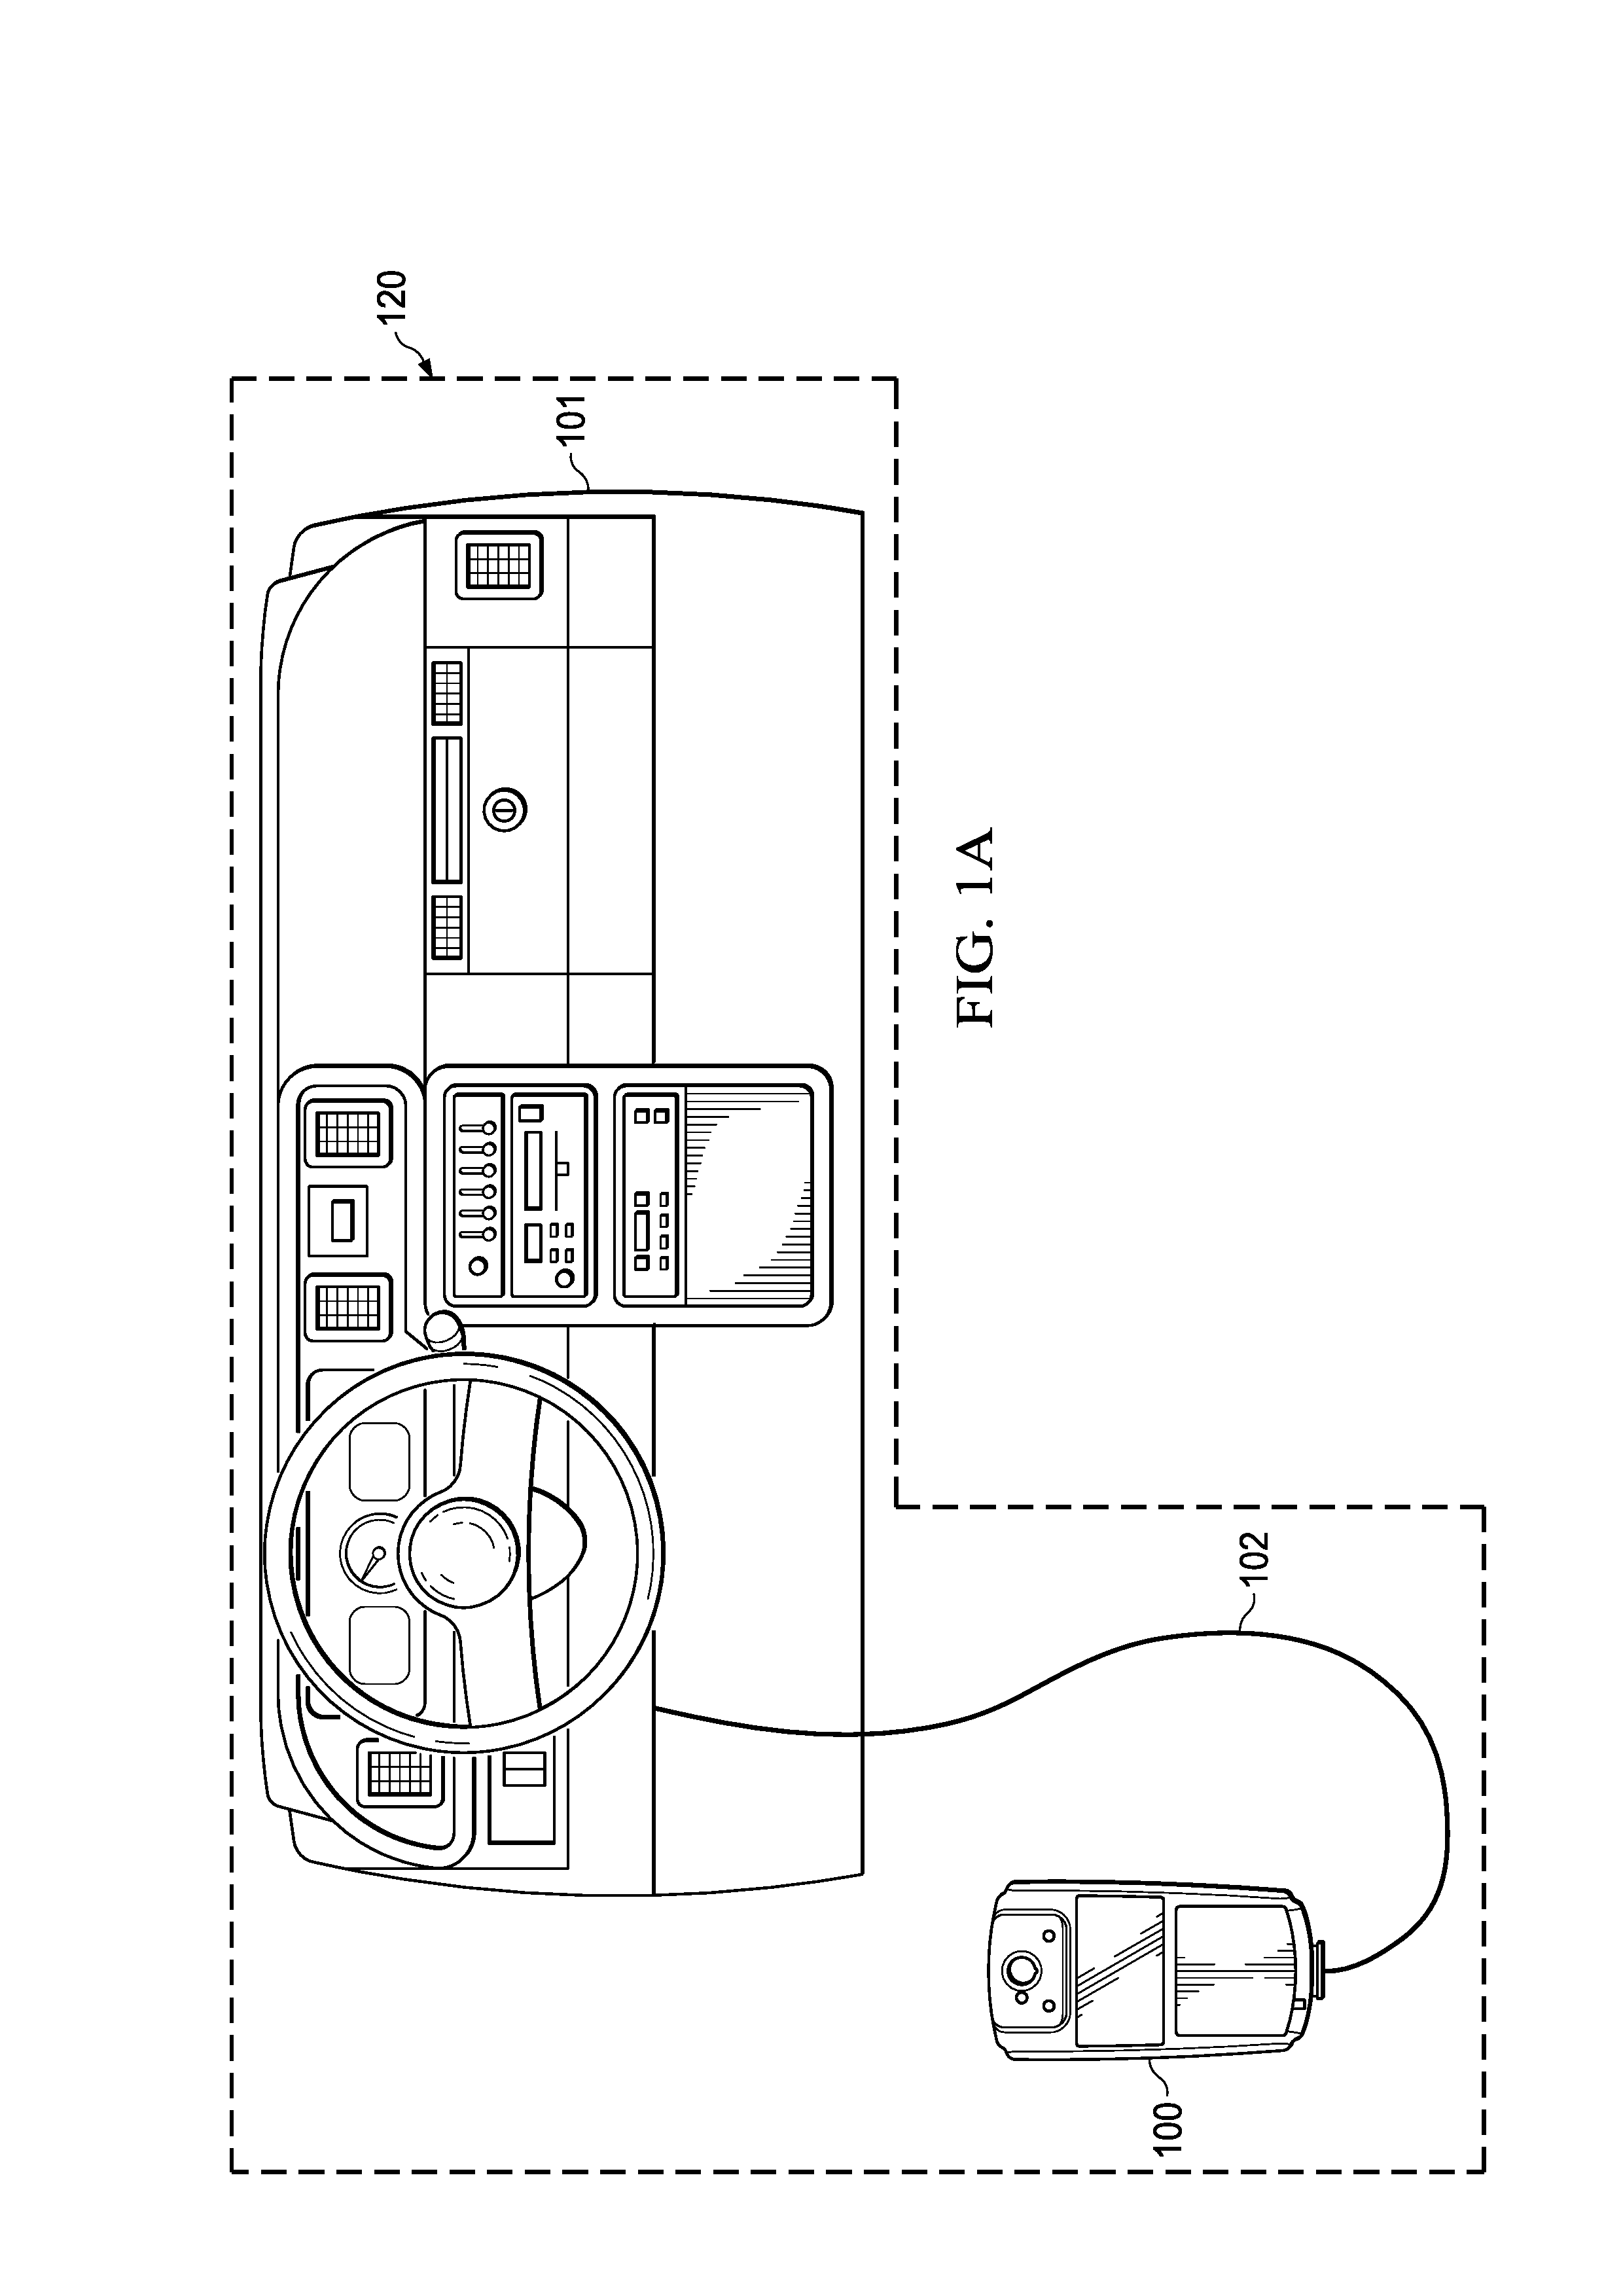 Vehicle sobriety interlock systems and methods with vehicle warm-up support